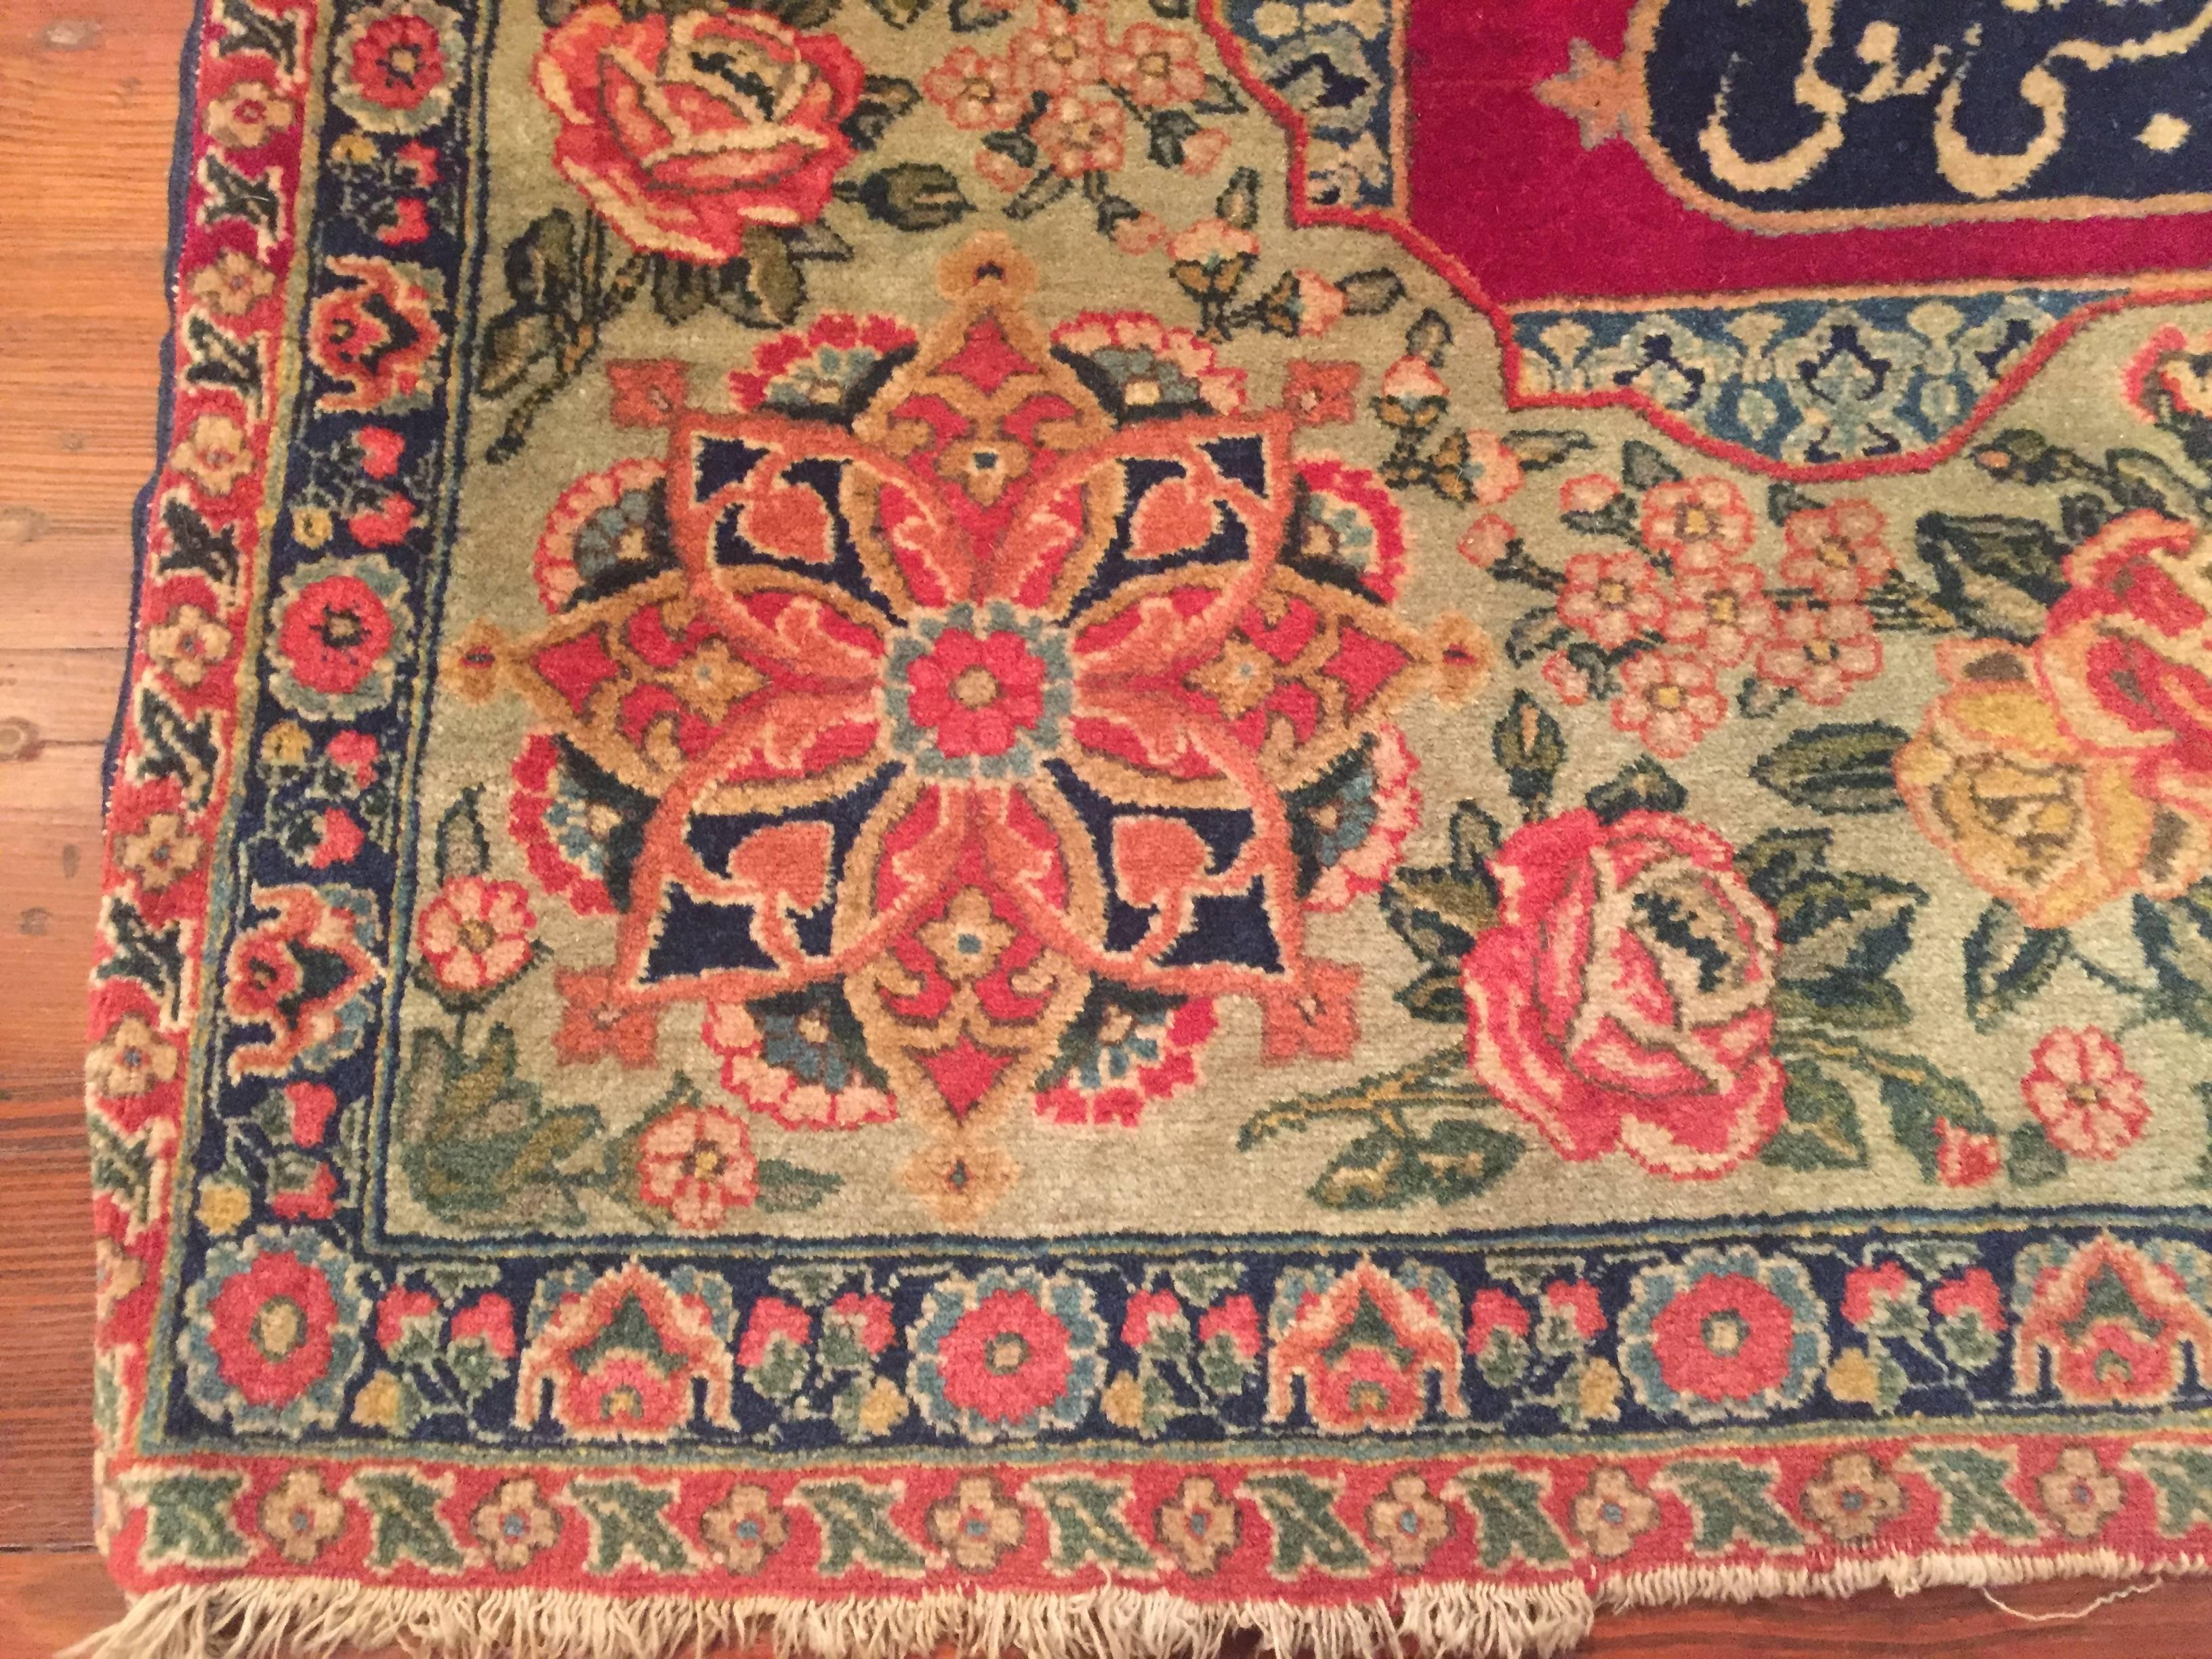 Early 20th Century Antique Persian Pictorial Tabriz Rug In Good Condition For Sale In Louisville, KY